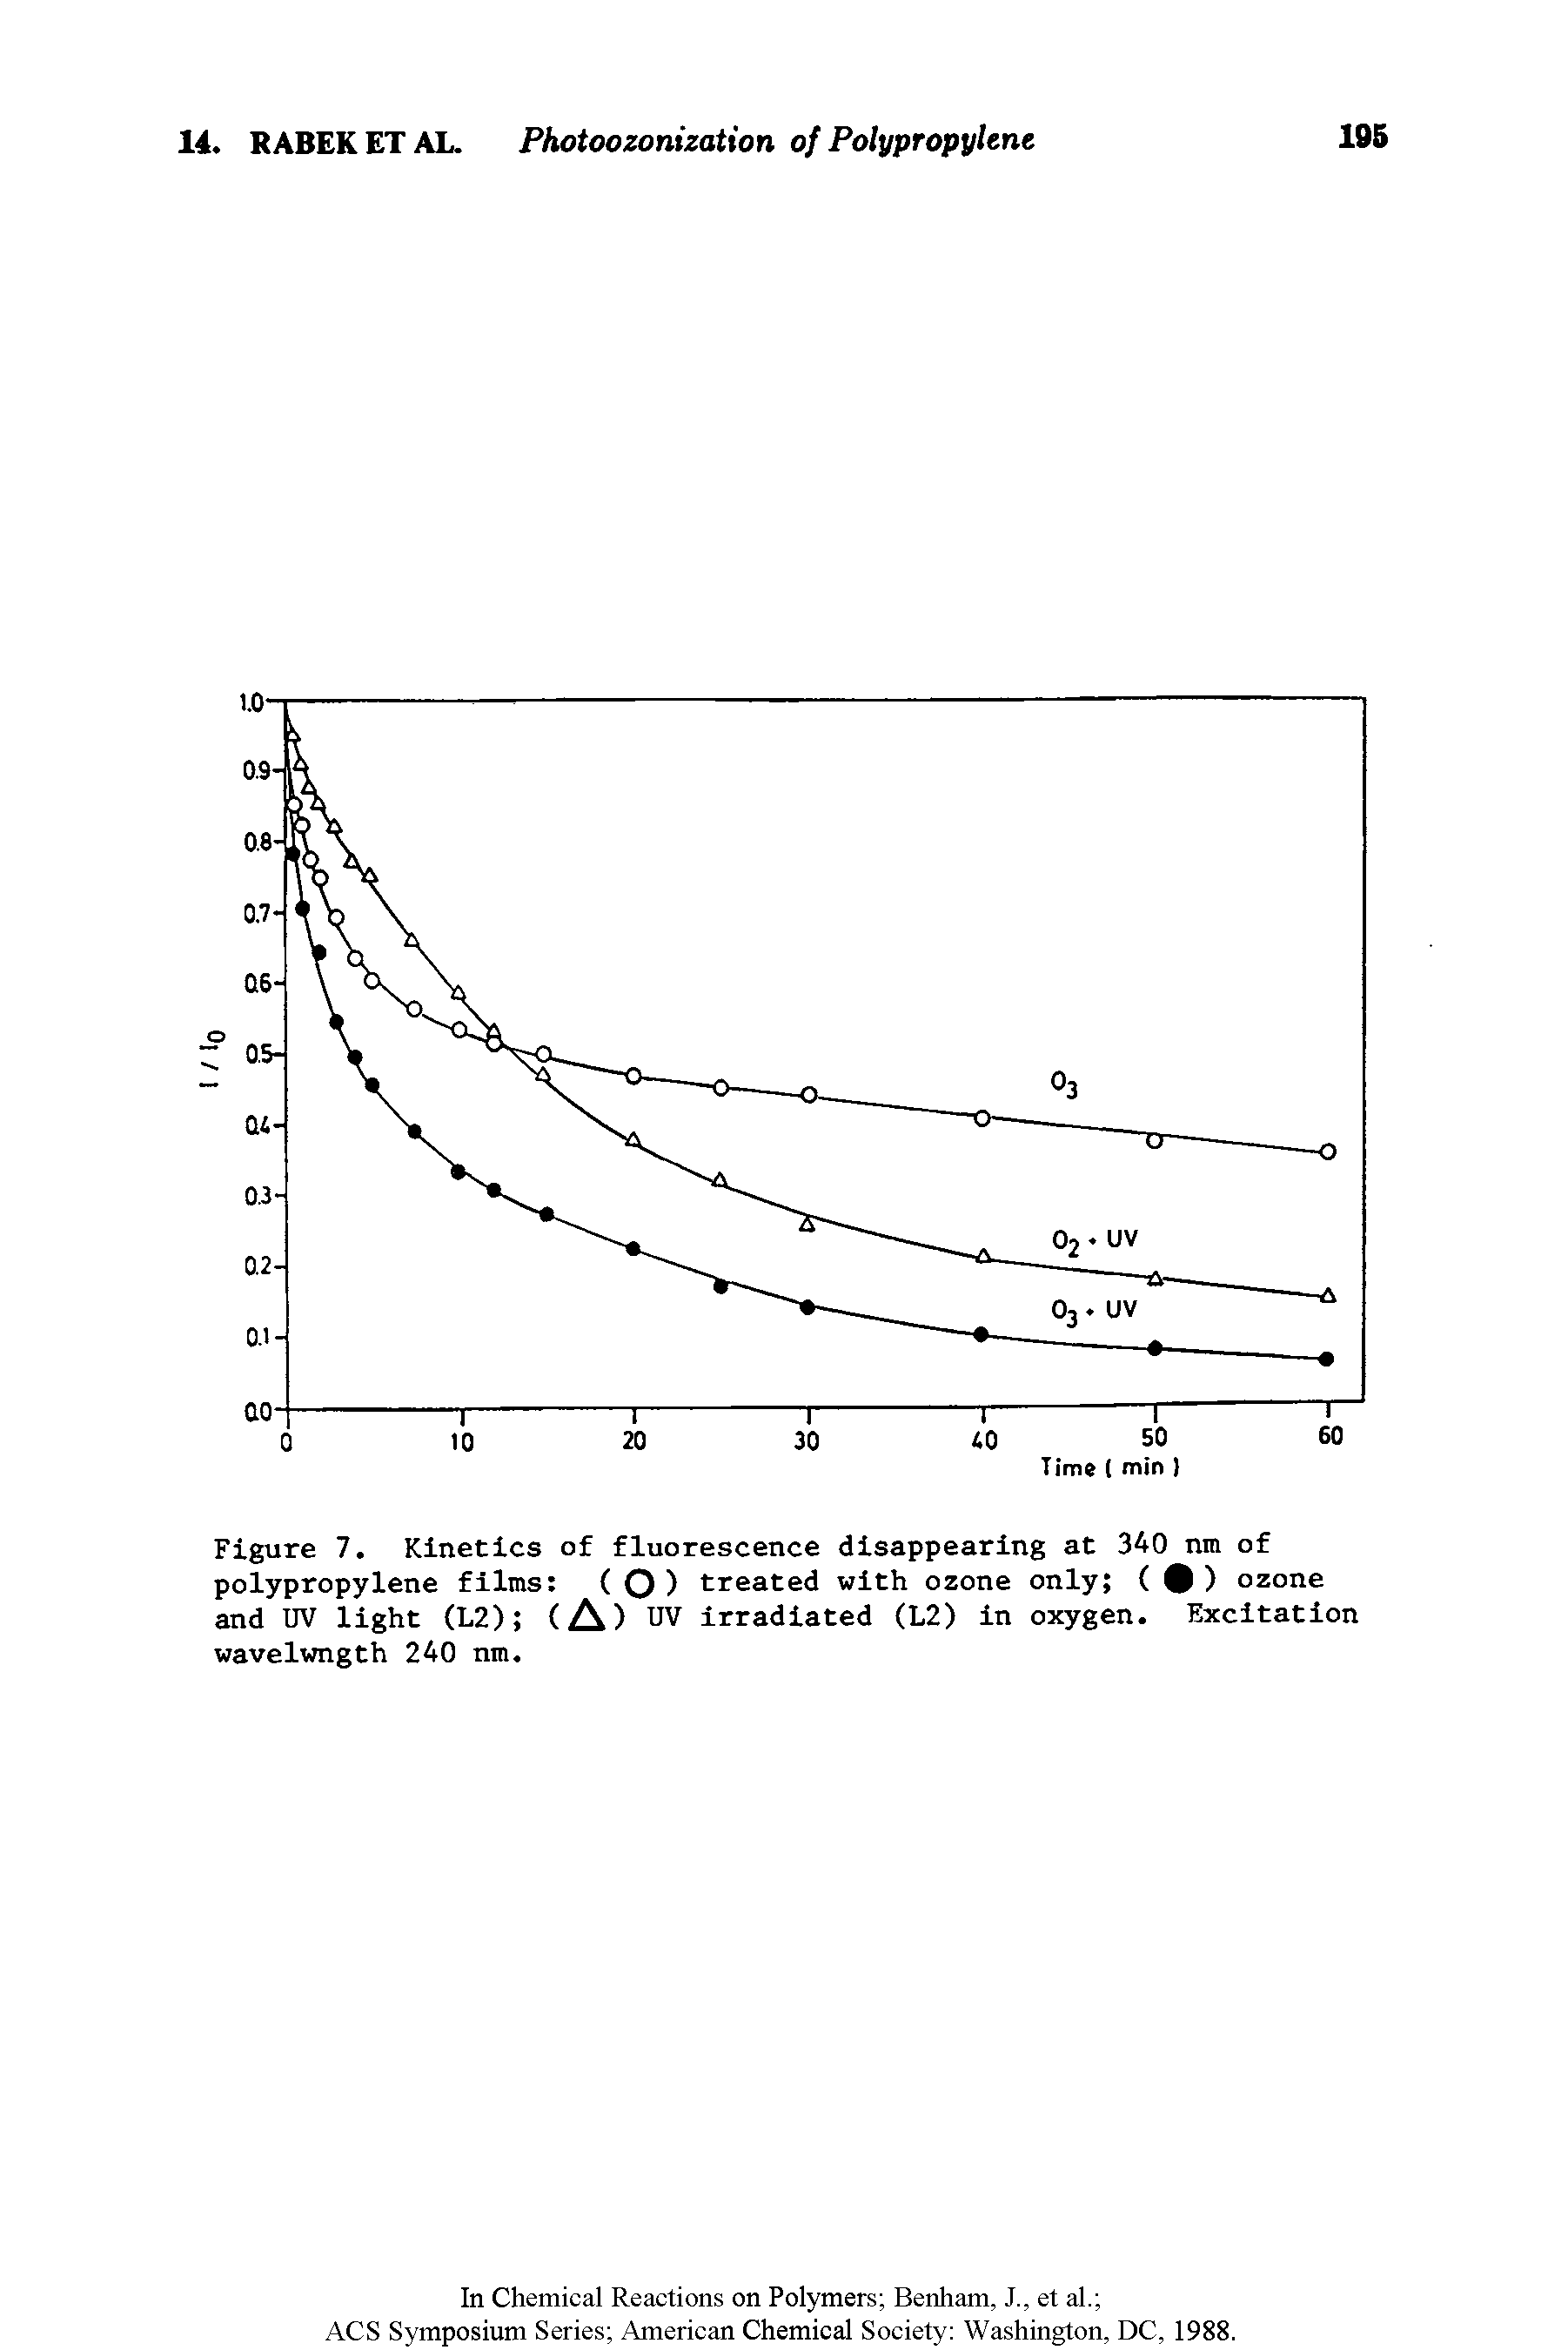 Figure 7. Kinetics of fluorescence disappearing at 340 nm of polypropylene films ( O) treated with ozone only (9) ozone and UV light (L2) (A) UV irradiated (L2) in oxygen. Excitation wavelwngth 240 nm.